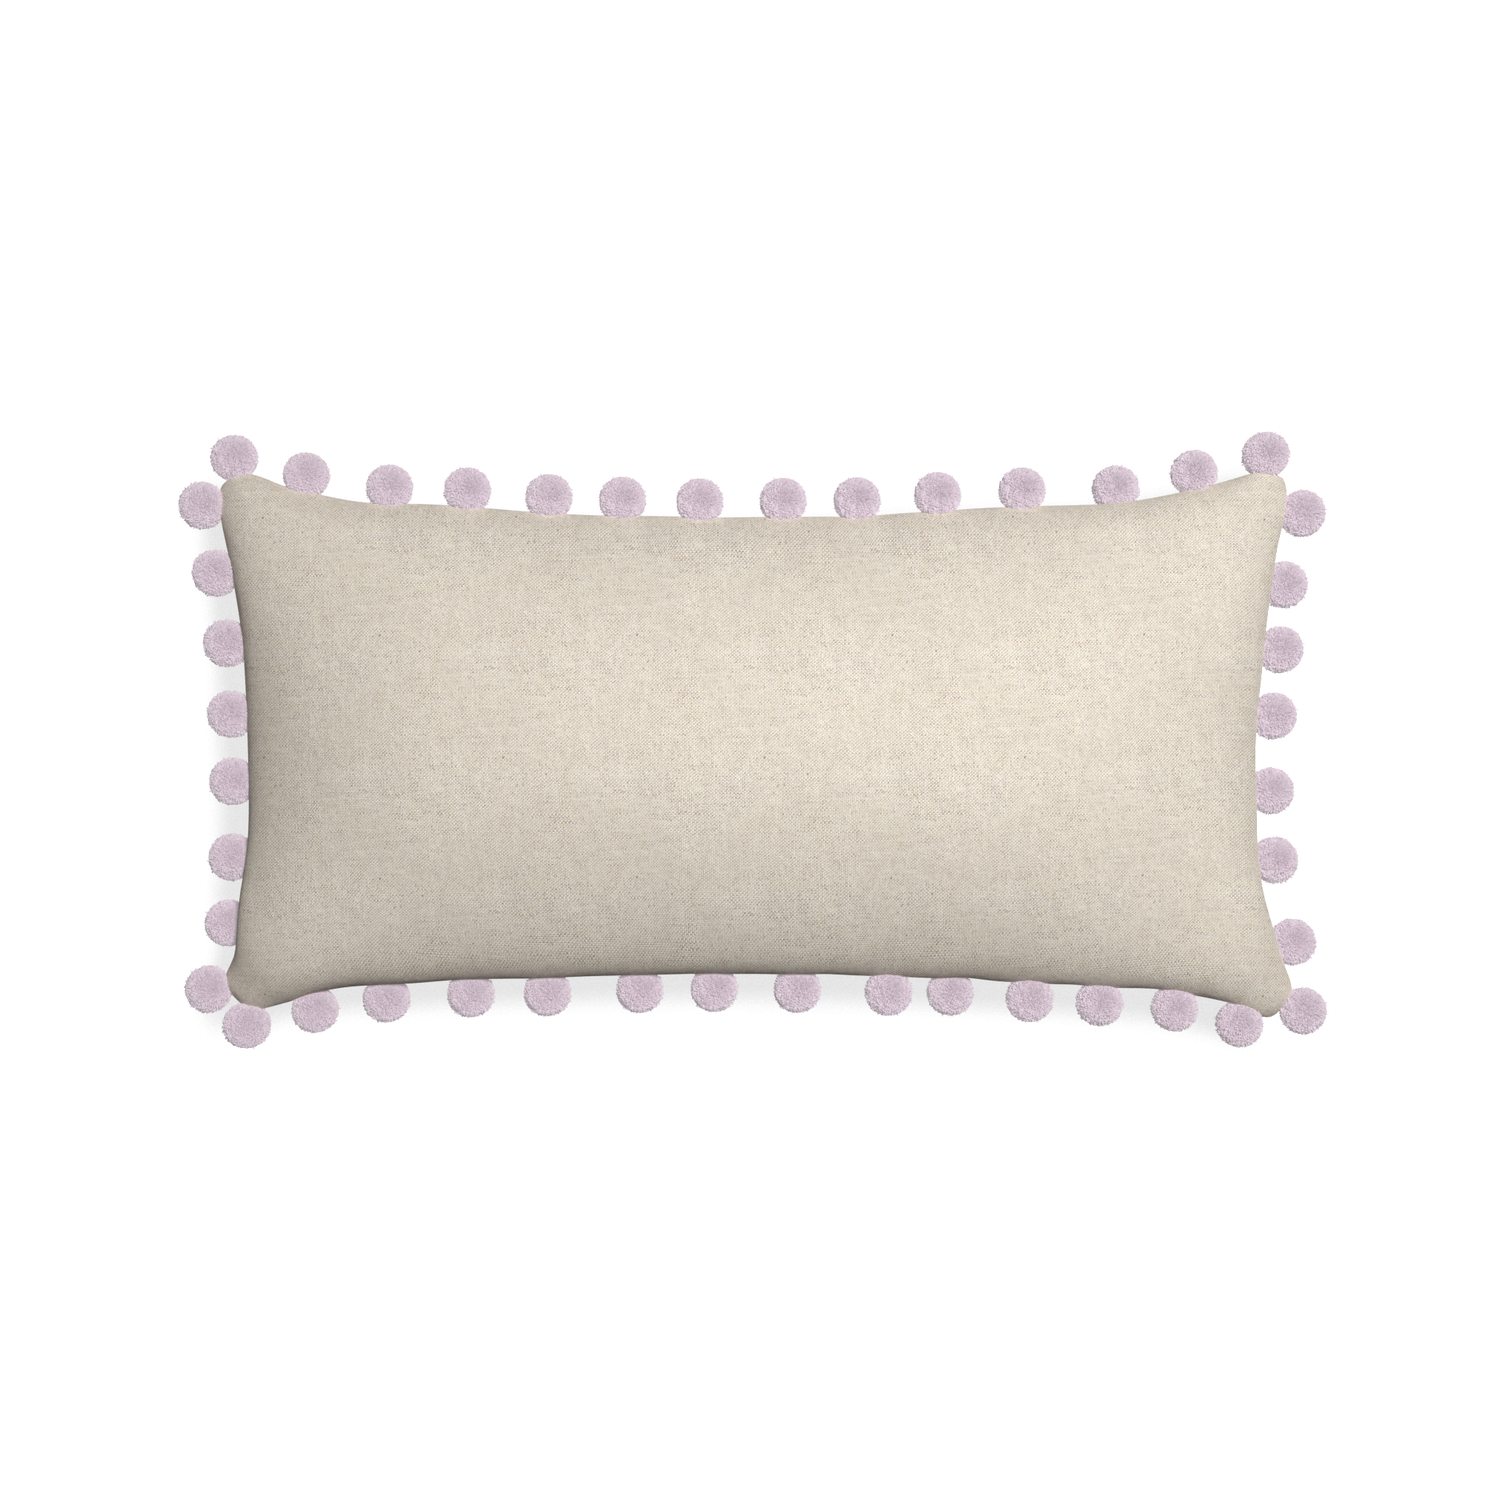 Midi-lumbar oat custom light brownpillow with l on white background